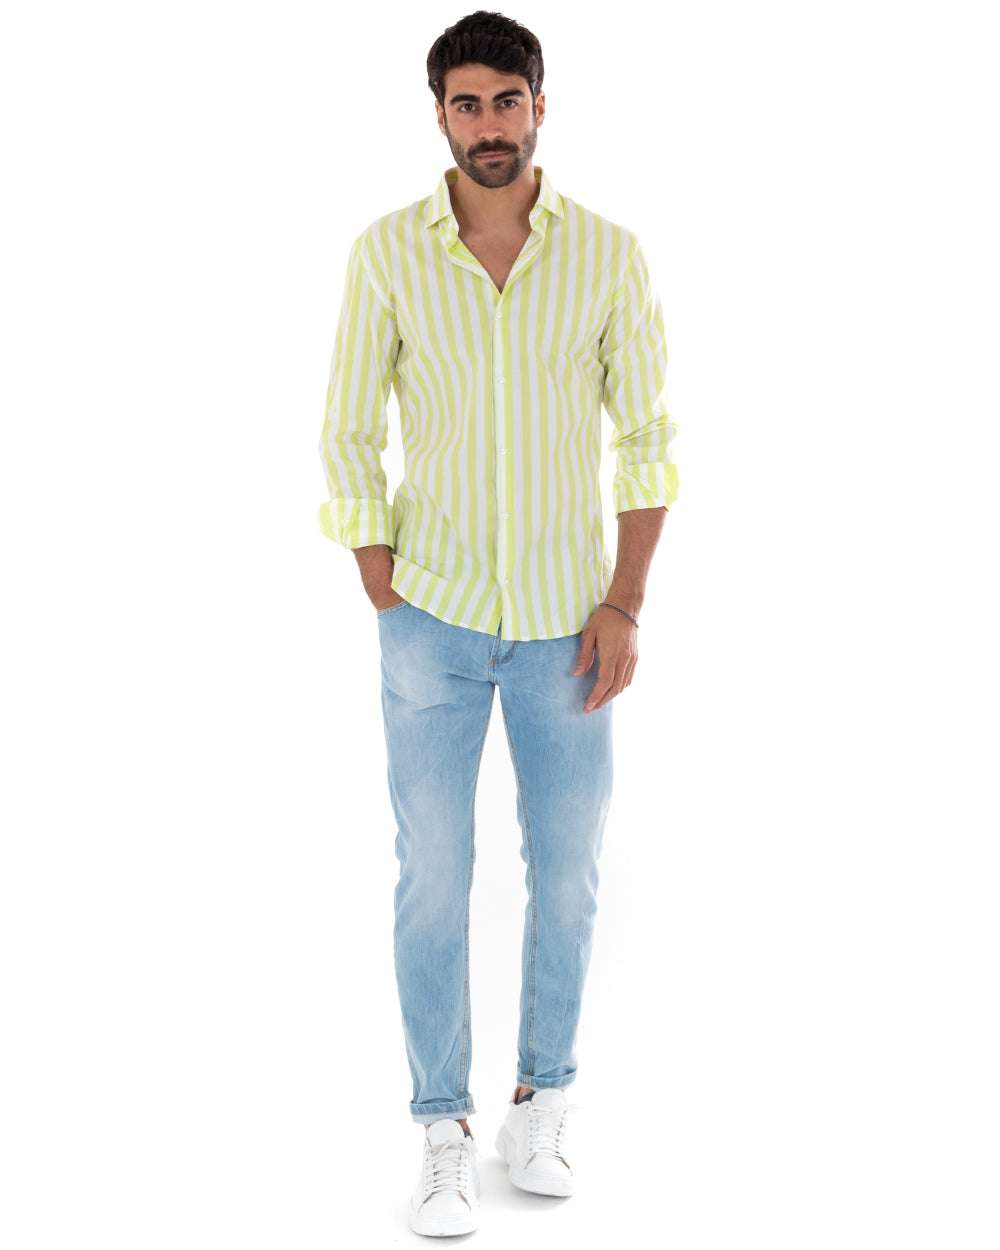 Men's Shirt With Collar Long Sleeves Striped Cotton Yellow GIOSAL-C2313A